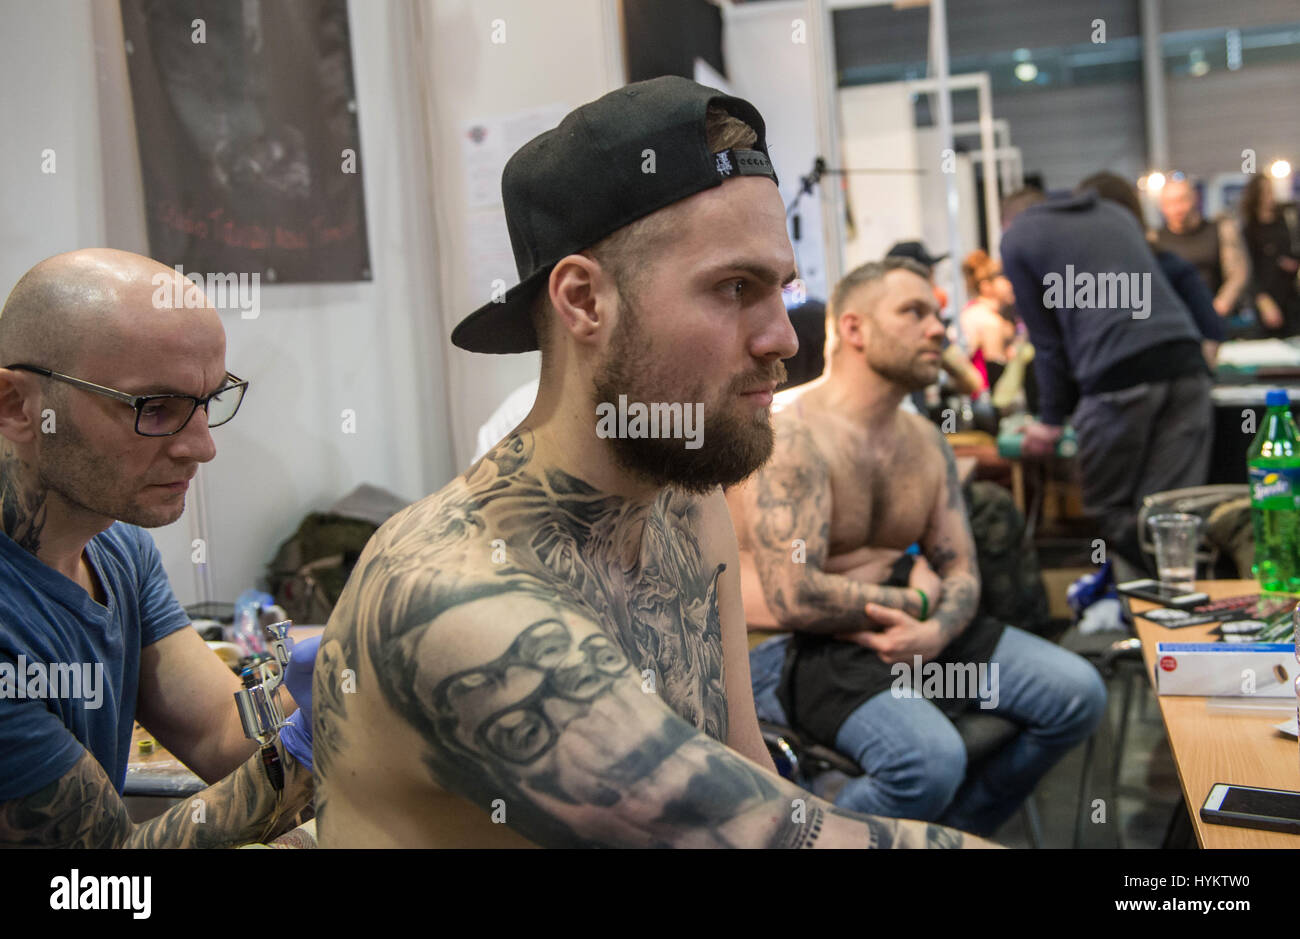 Poznan, Poland: INKED IN men with full body tattoos to ladies having their most intimate parts decorated this tattoo convention is a body art lover’s paradise. Pictures show how guests at the Poznan Tattoo Convention, Poland enjoyed becoming part of the show – by allowing the 300 exhibiting tattoo artists to ink their bodies. The convention runs this weekend from March 19th to 20th. Stock Photo